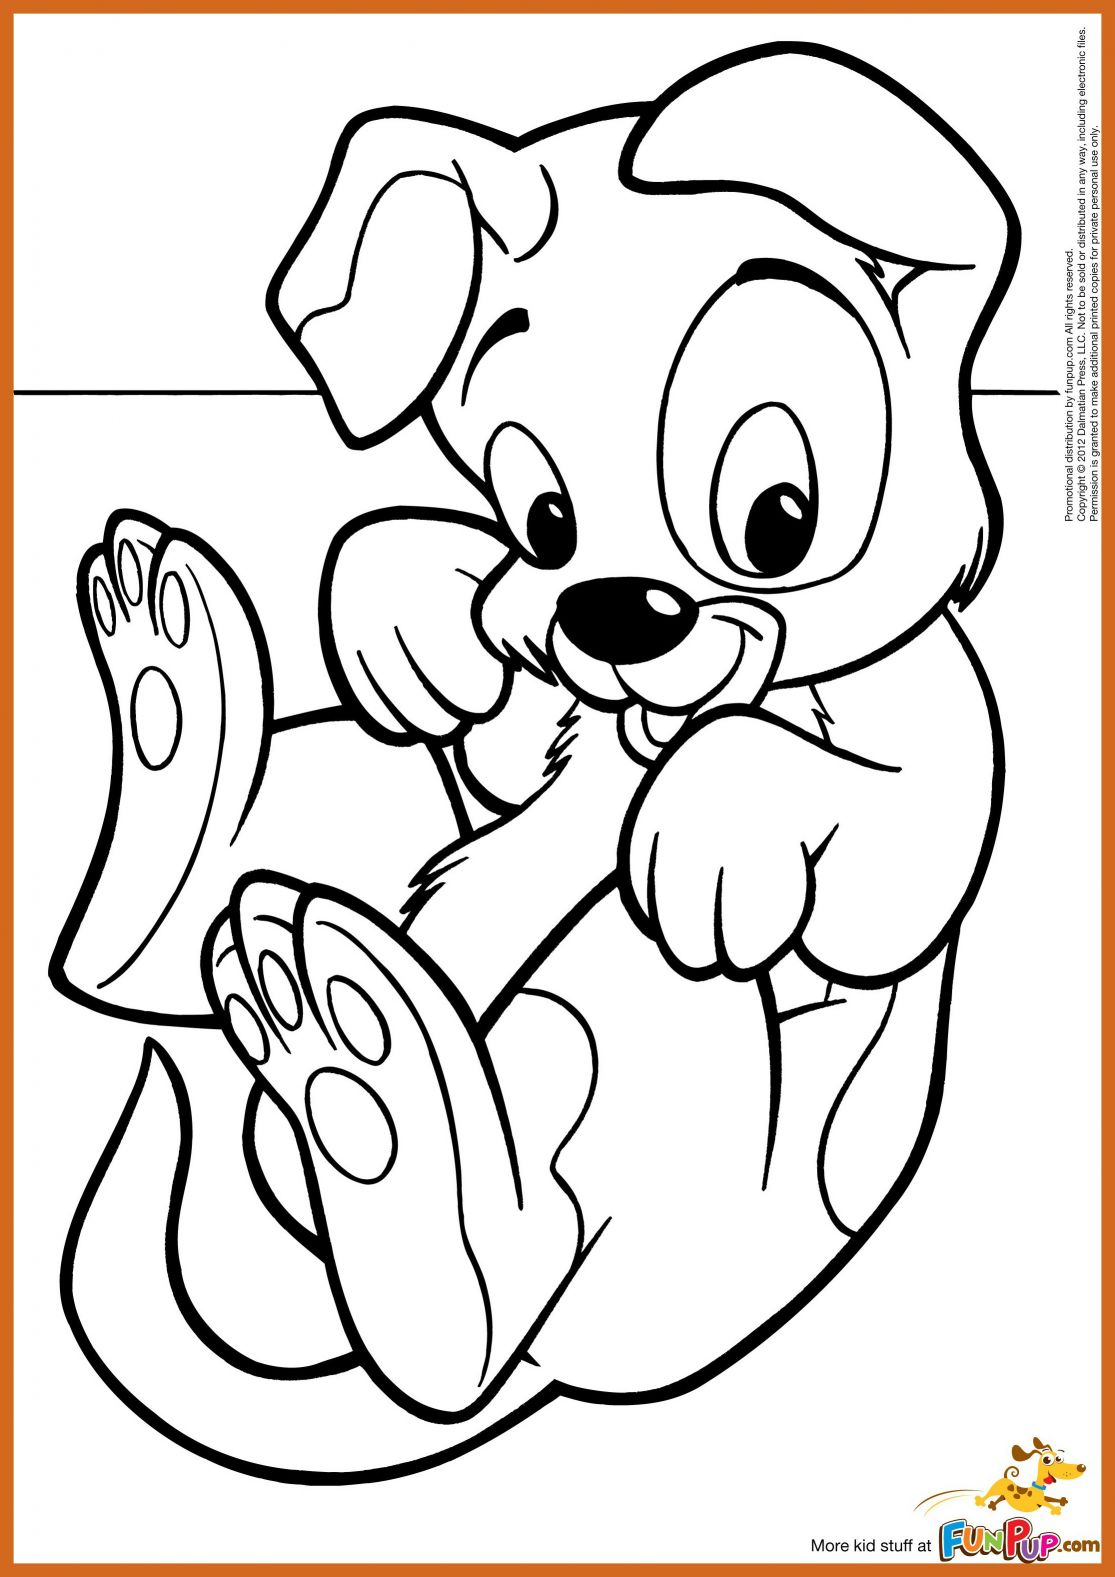 Beagle Puppy Coloring Pages at GetDrawings Free download